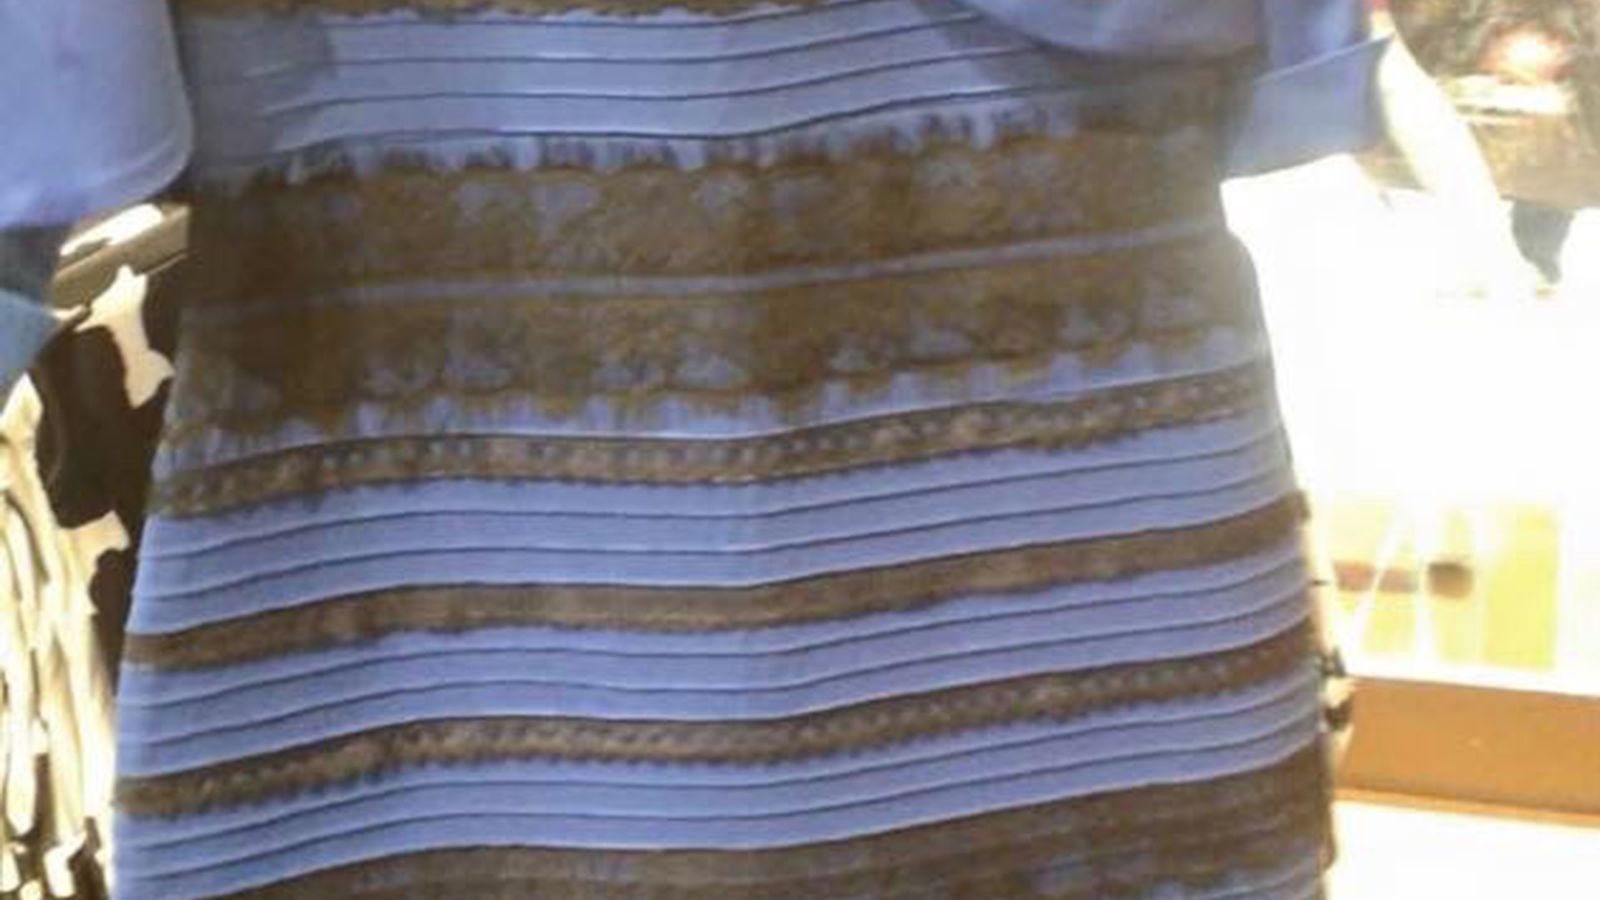 The science behind that absurd color-changing dress, explained - Vox